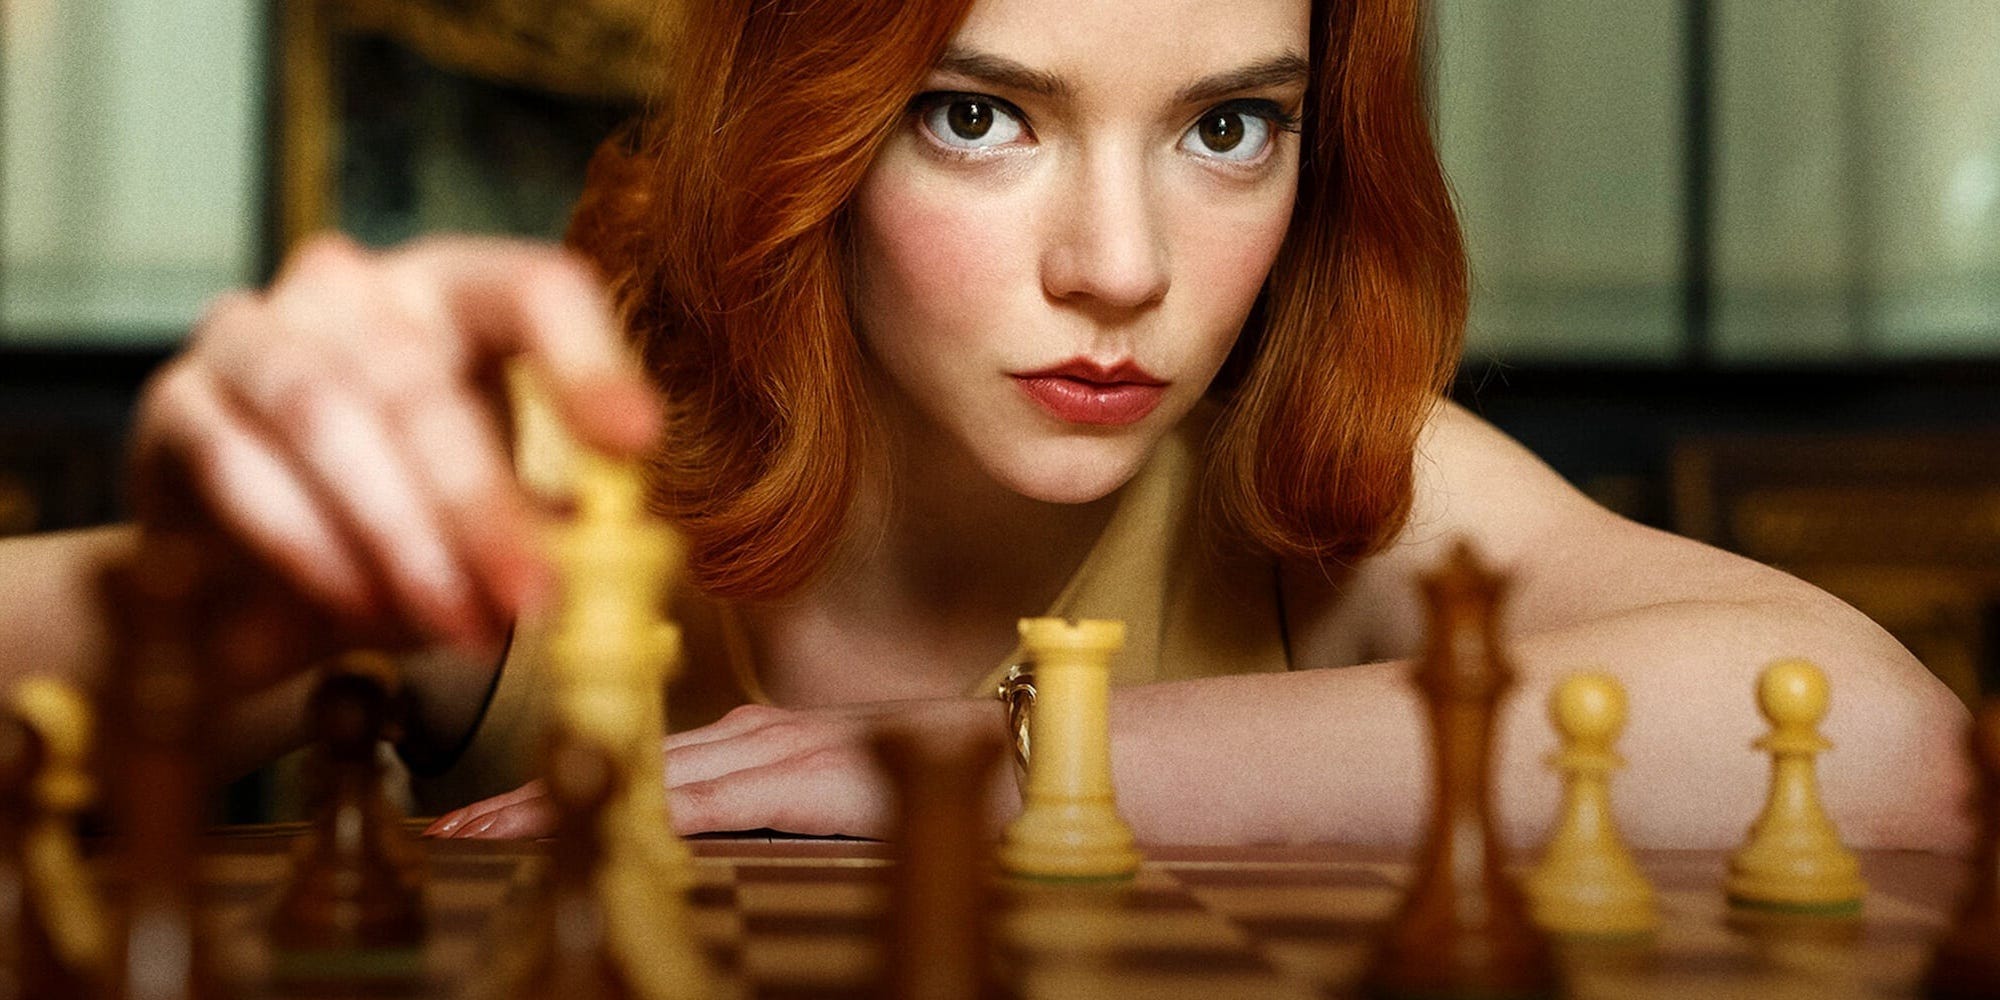 Chess in popular culture - Chessentials